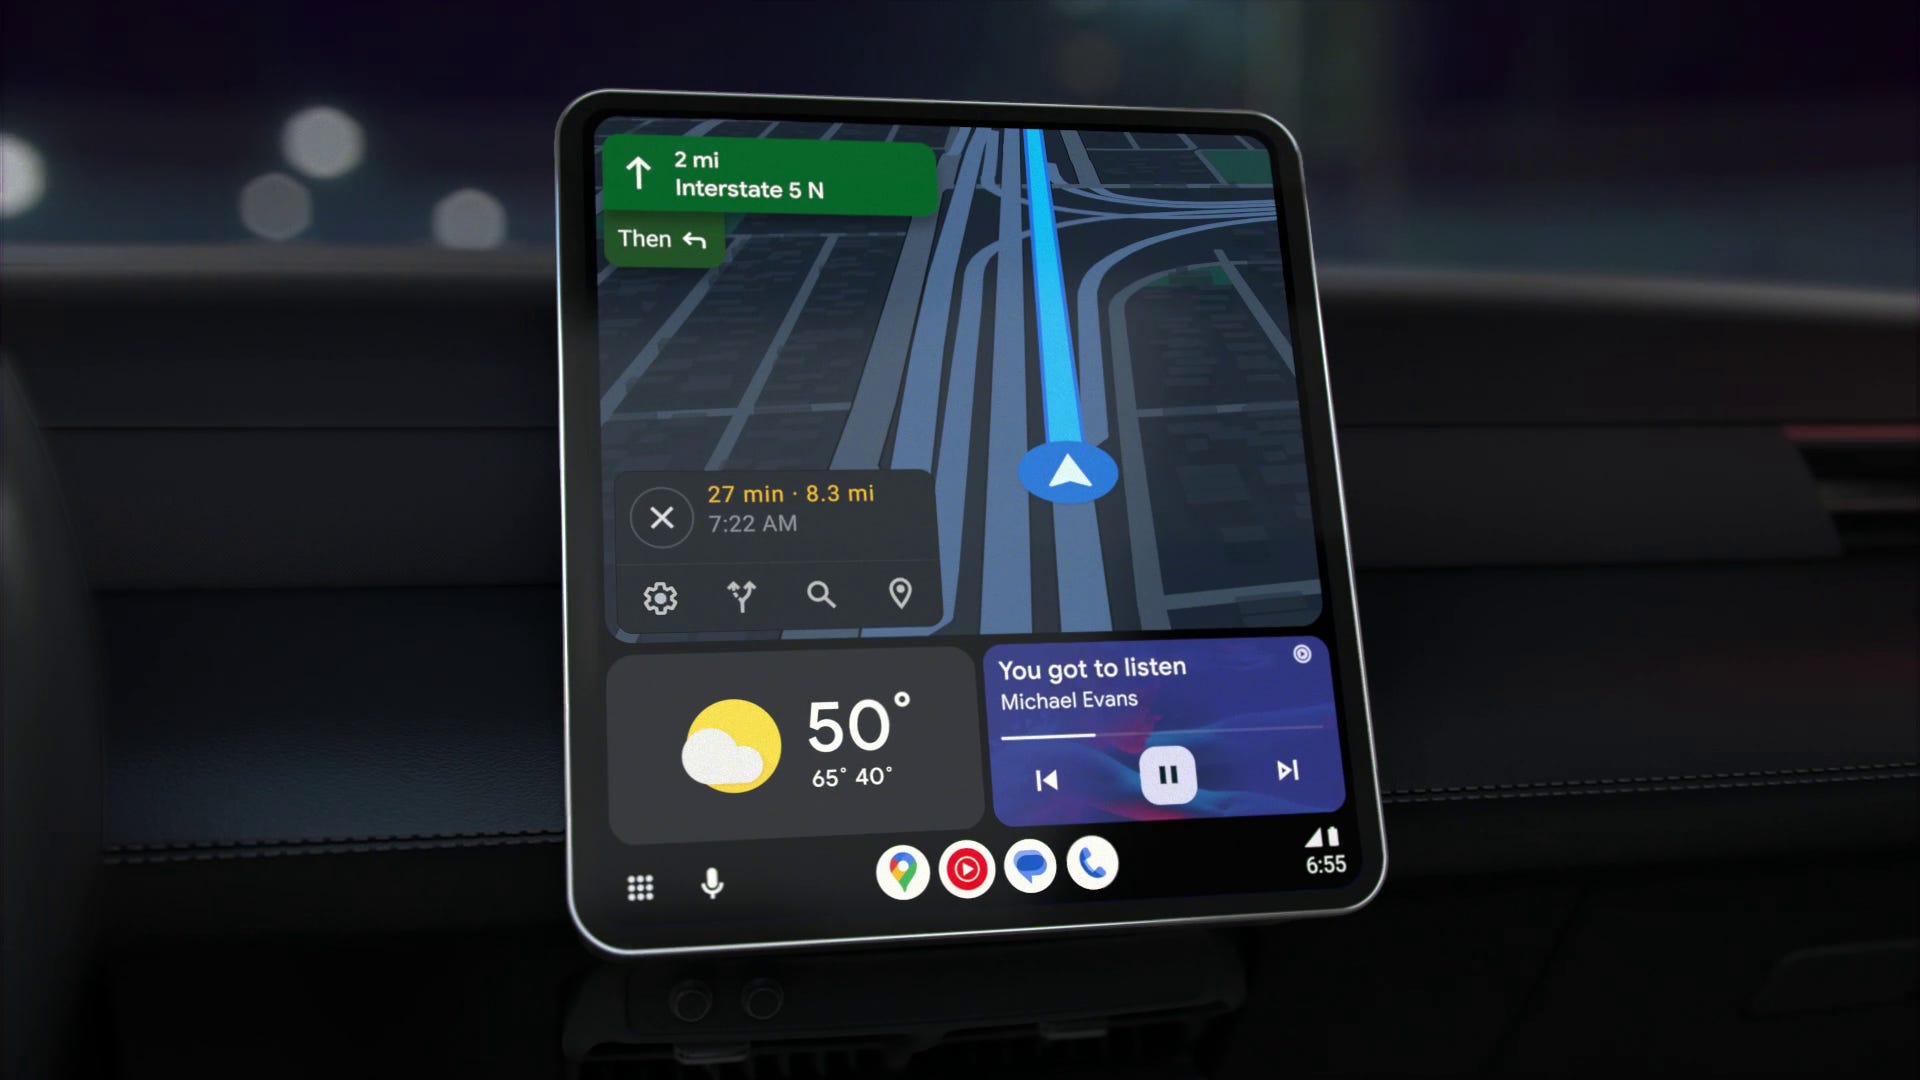 Android Auto Redesign Finally Rolling Out at CES - CNET